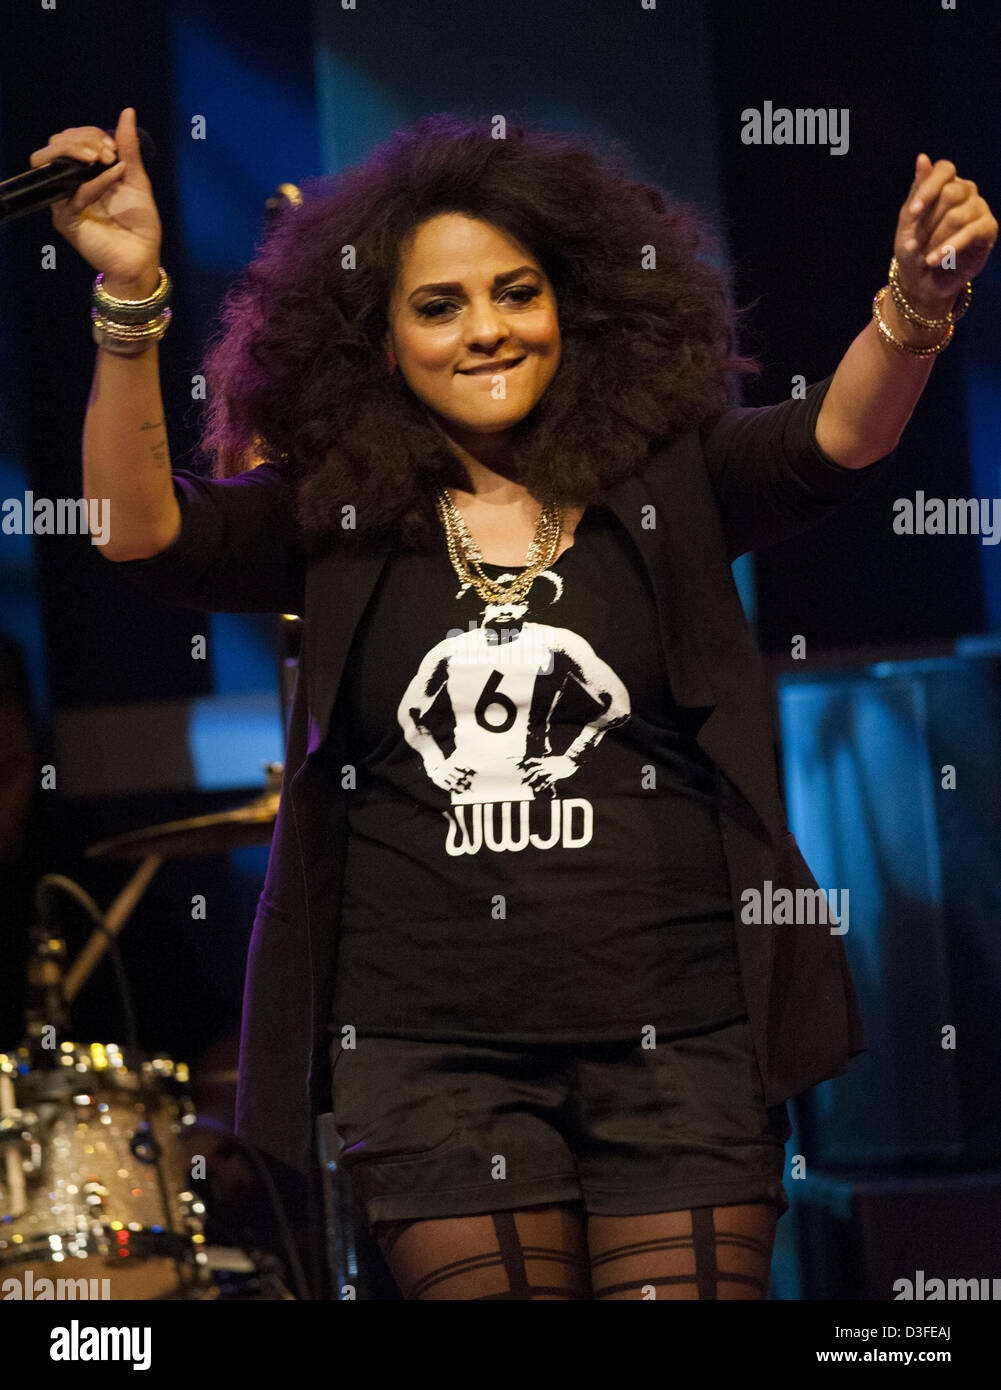 Philadelphia, Pennsylvania, U.S. Feb. 18, 2013. R&B singer and two time Grammy Nominee, MARSHA AMBROSIUS, performing at World Cafe Live in Philadelphia.  Ambrosius performed songs from her album, ' Late Nights and Early Mornings' as well as a few of her past hits.  Credit Image: Credit:  Ricky Fitchett/ZUMAPRESS.com/Alamy Live News Stock Photo